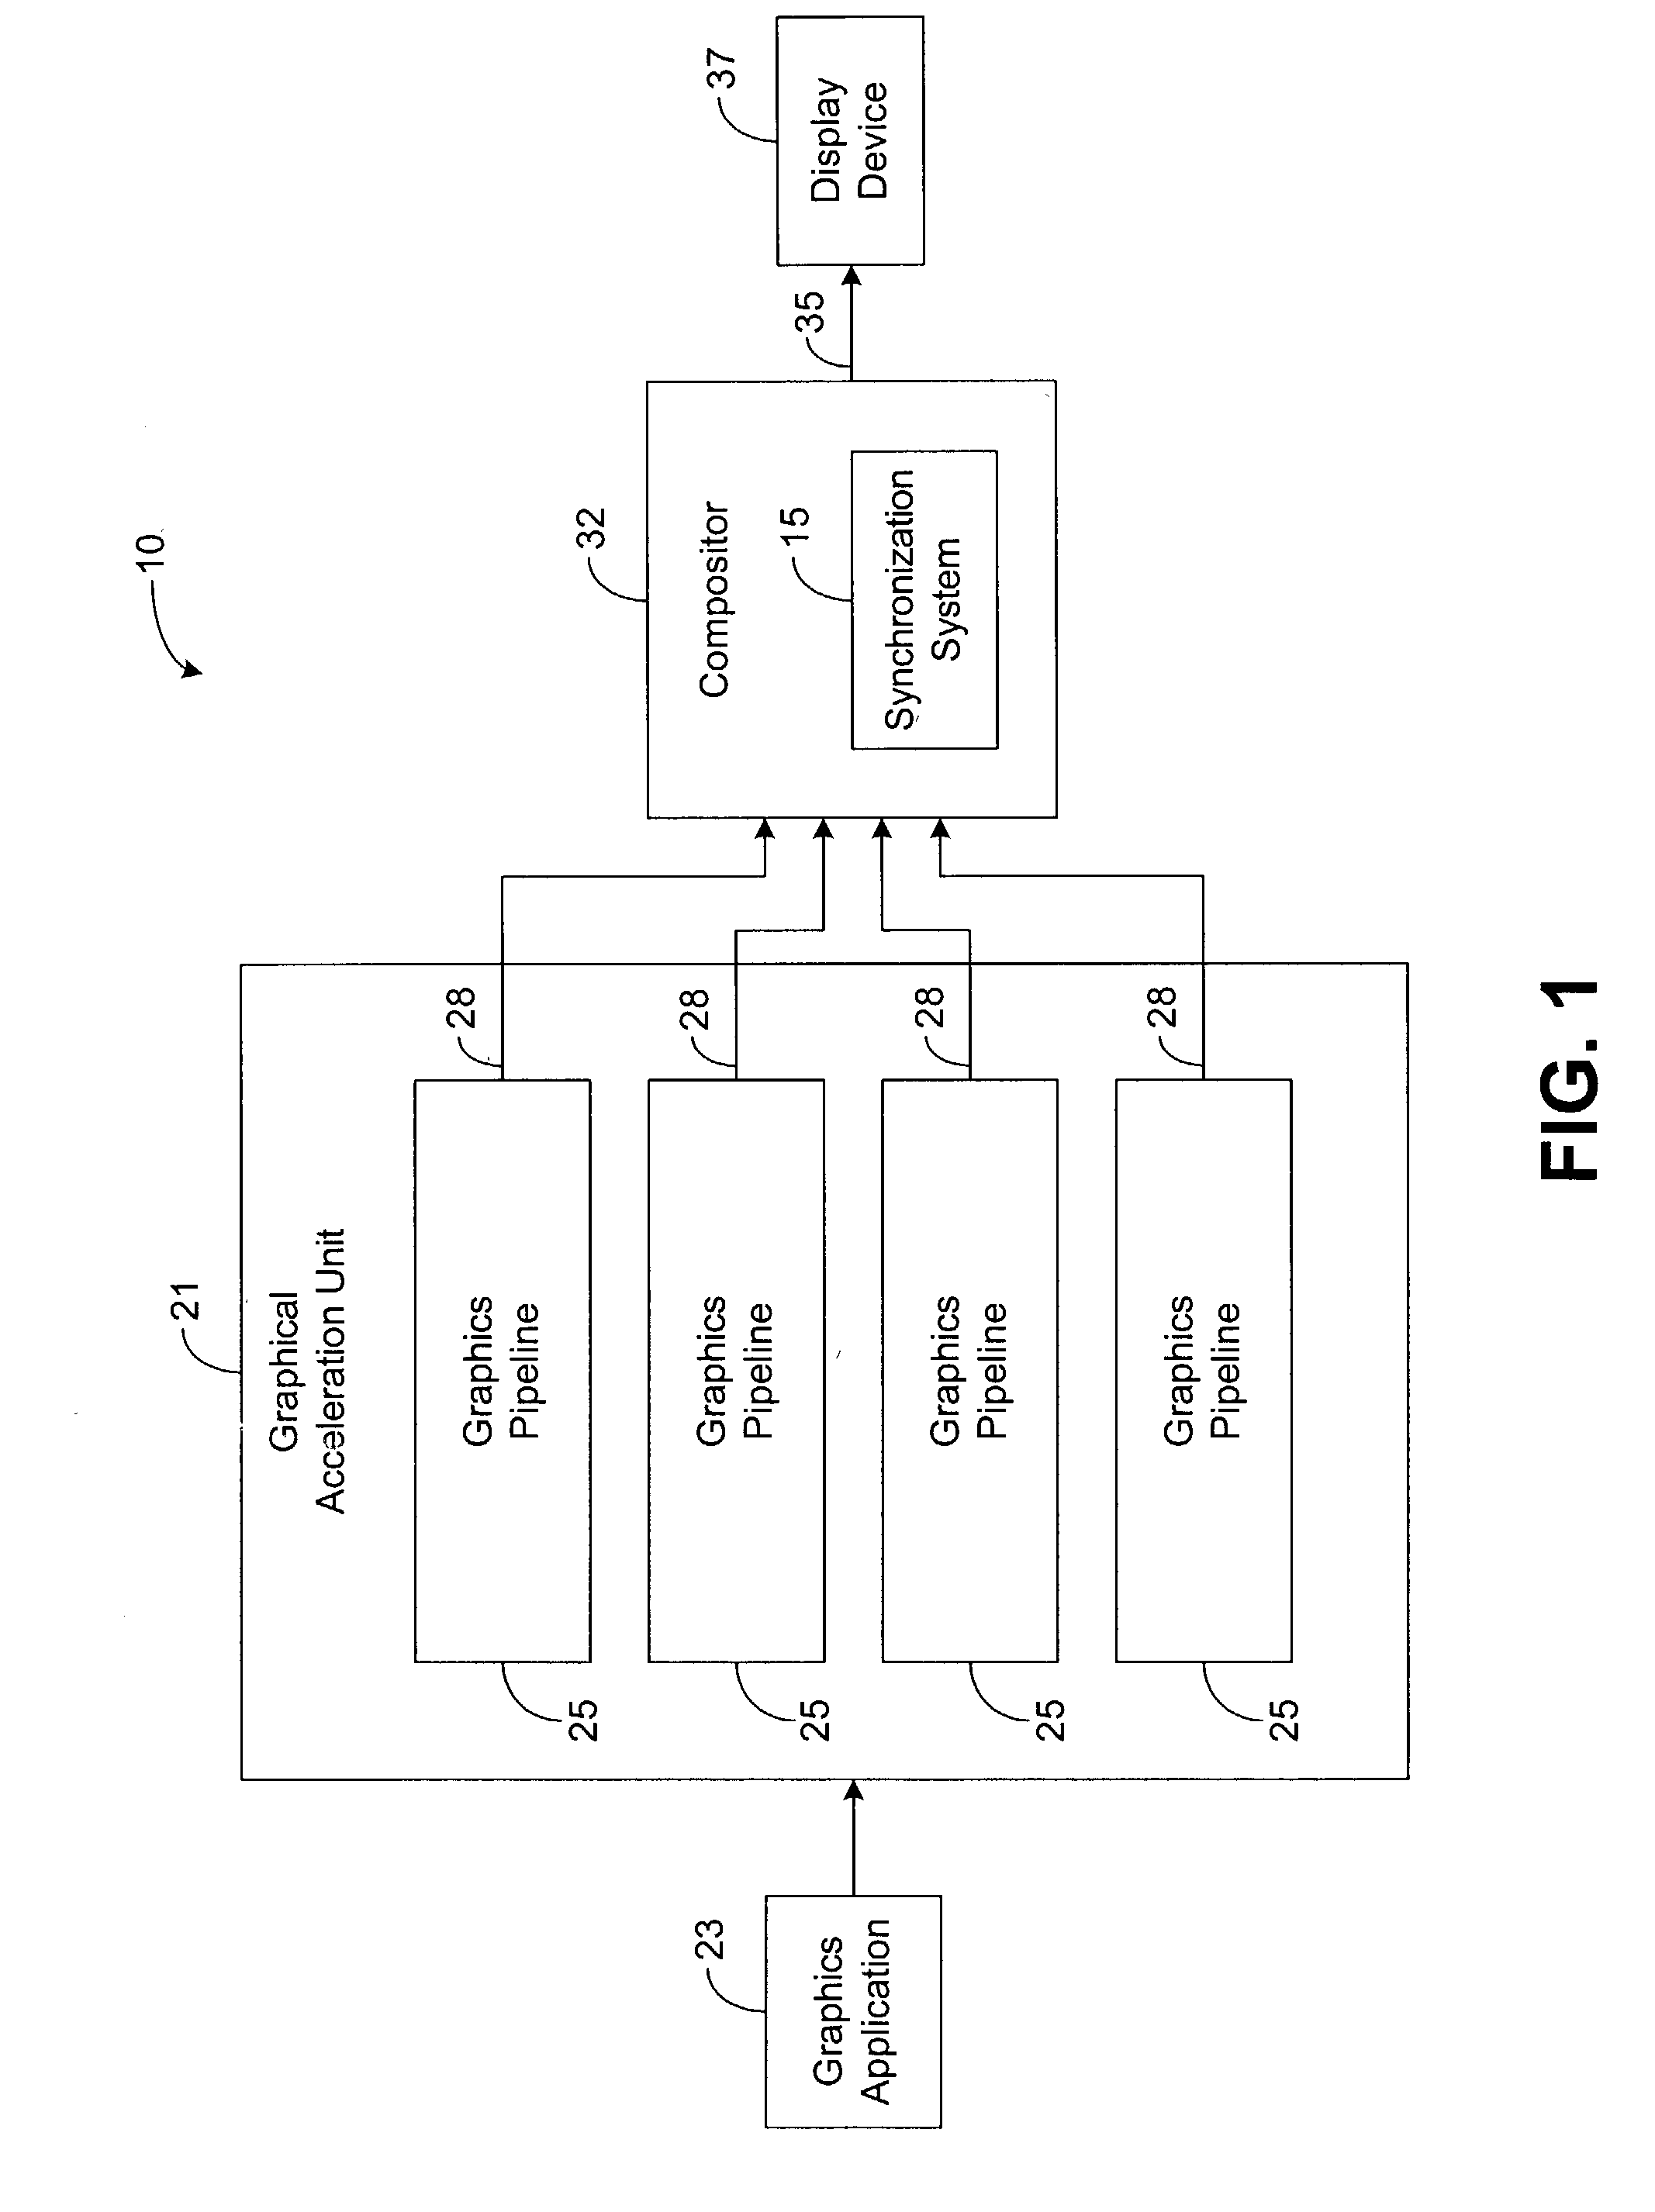 System and method for sychronizing video data streams